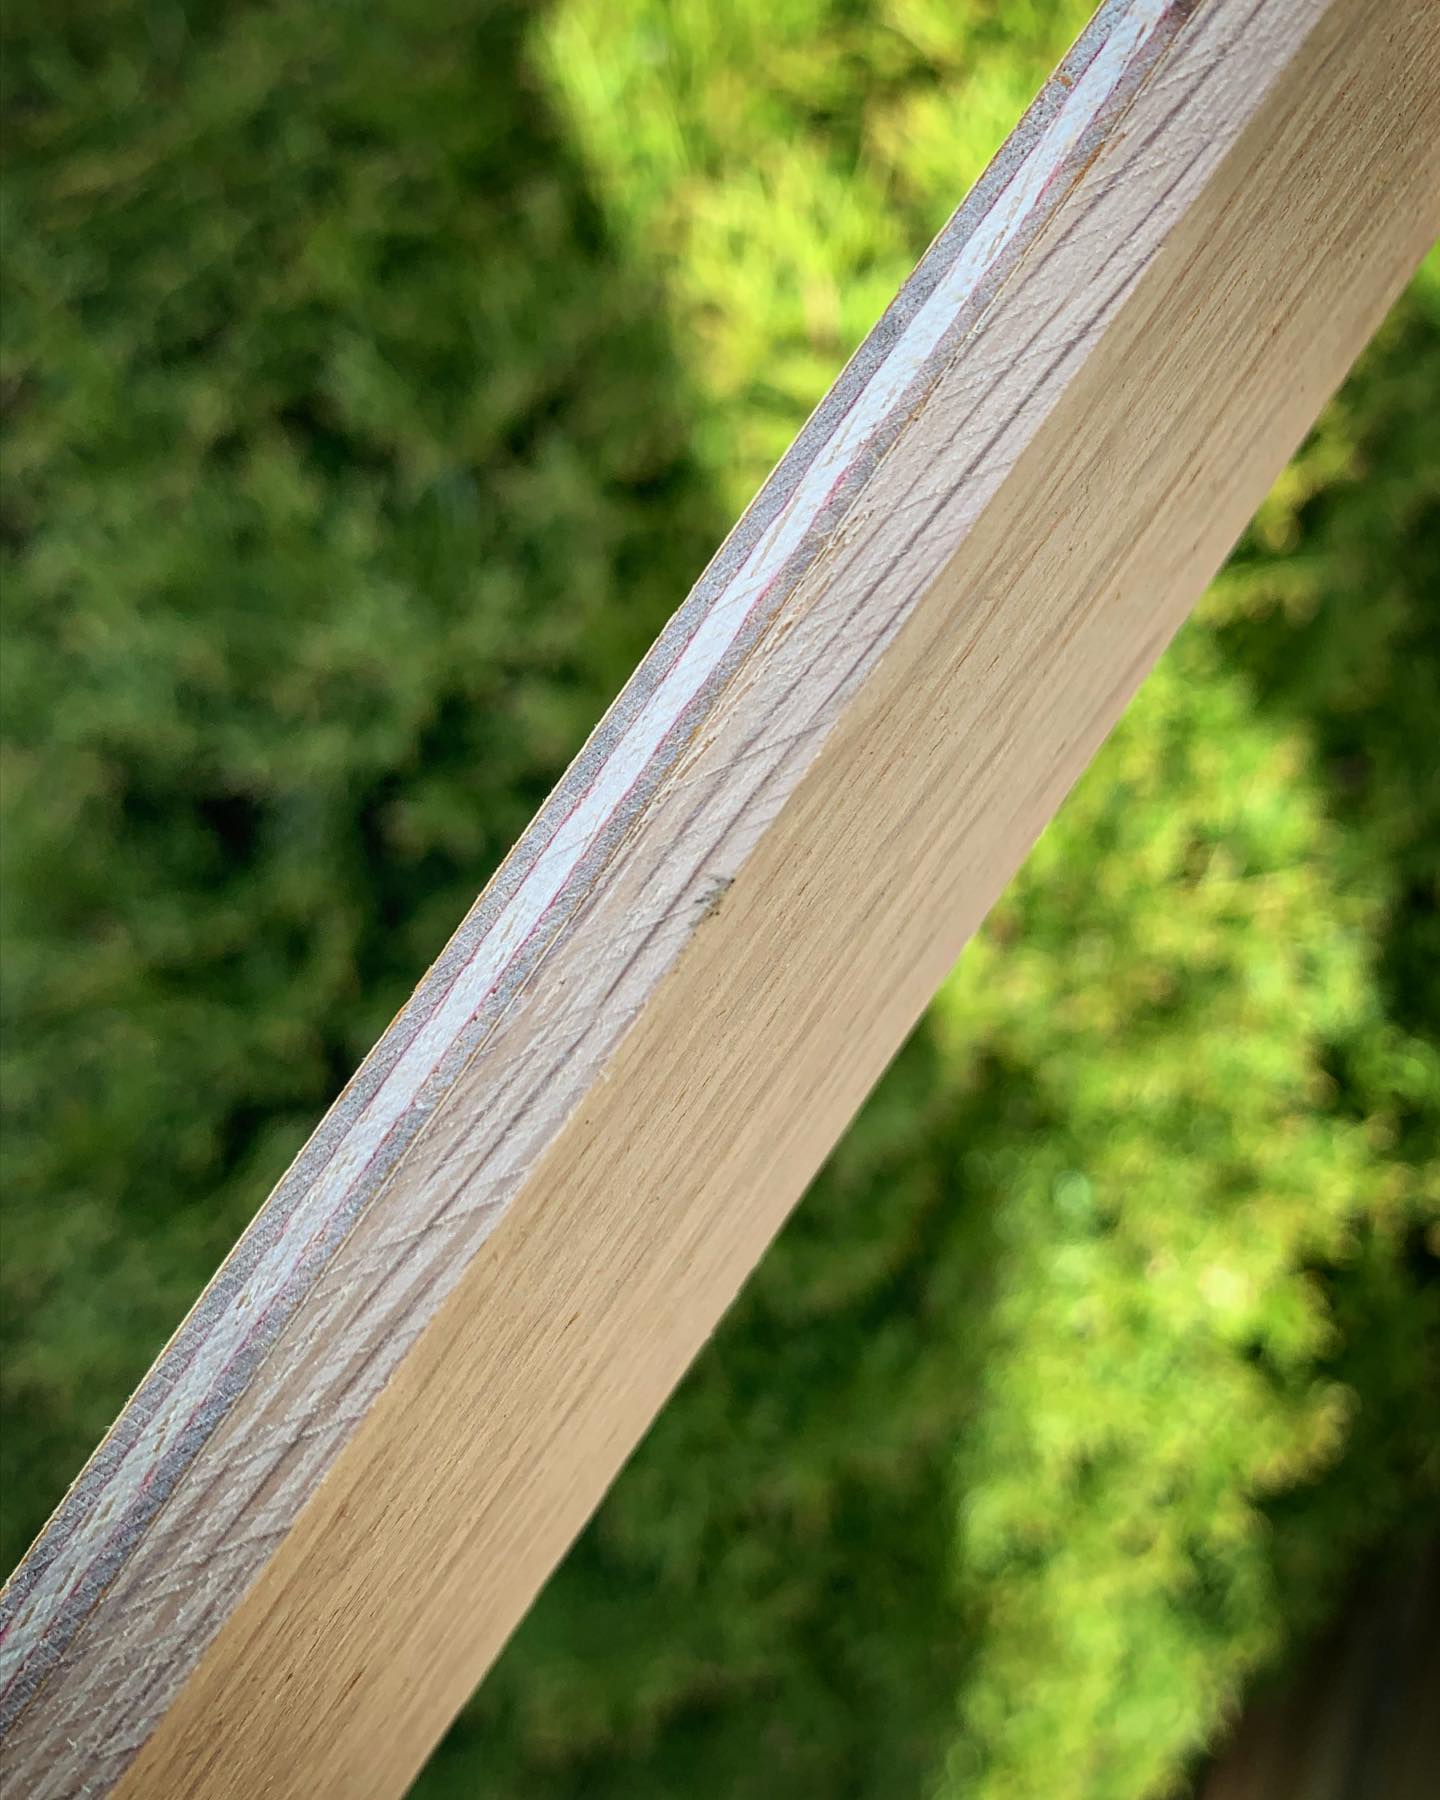 A nice close up of some plywood we’ve veneered with oak for a bespoke project we’re working on. ?